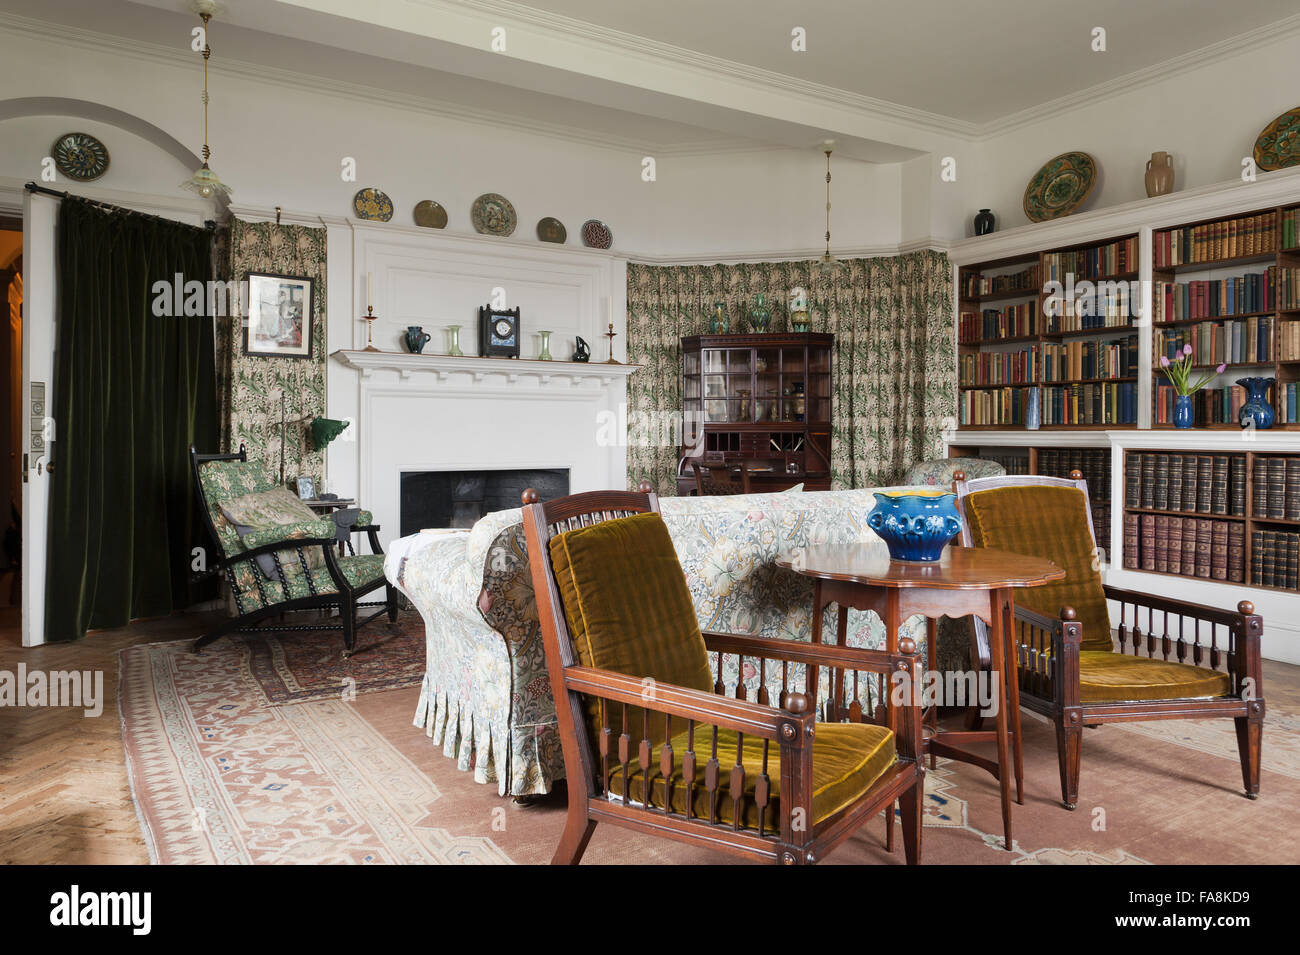 The Morning Room at Standen, West Sussex. Stock Photo